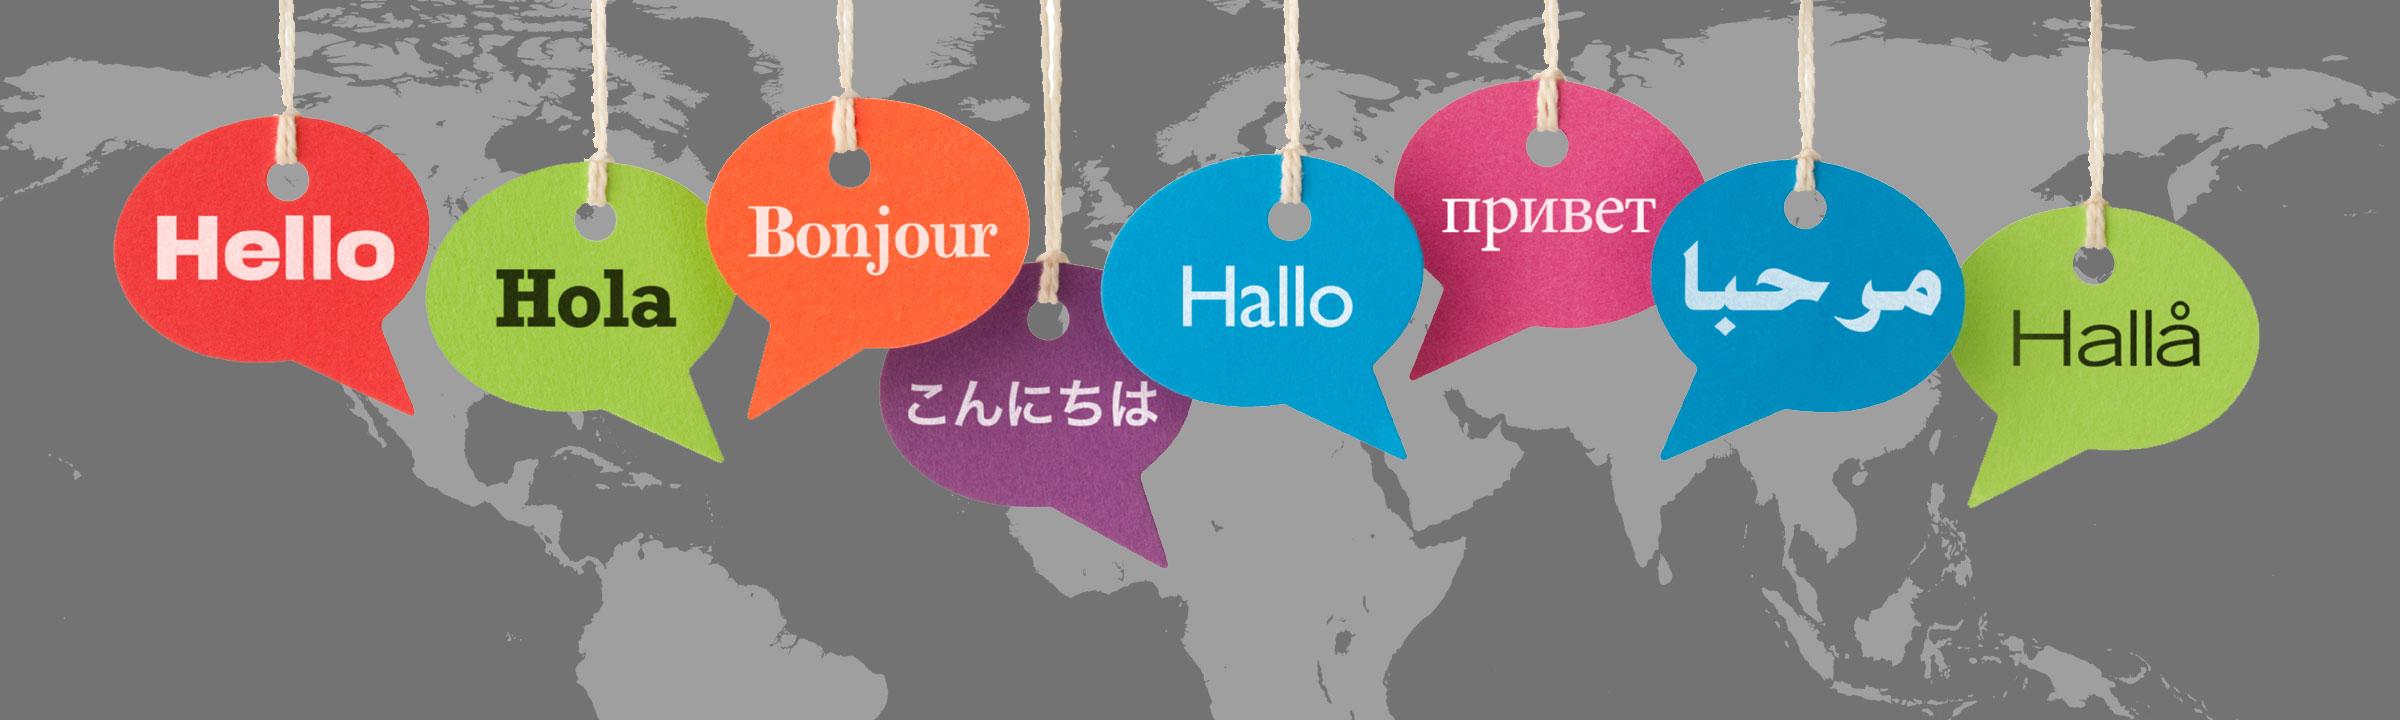 hardest-languages-to-learn1